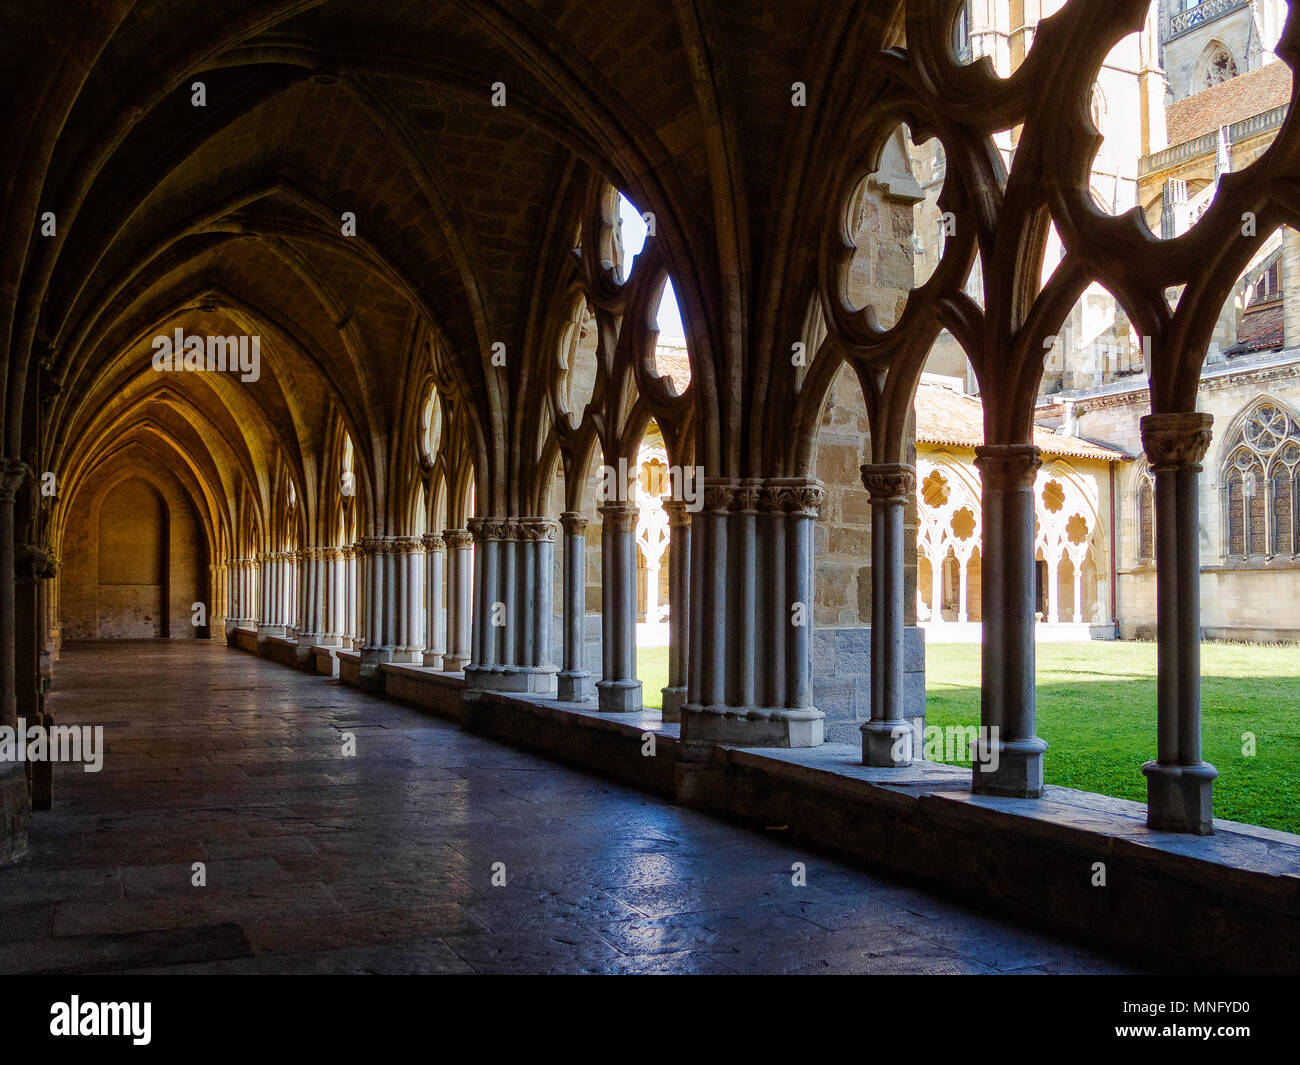 In the cloister of the Cathedral of Saint Mary - Bayonne, France Stock Photo